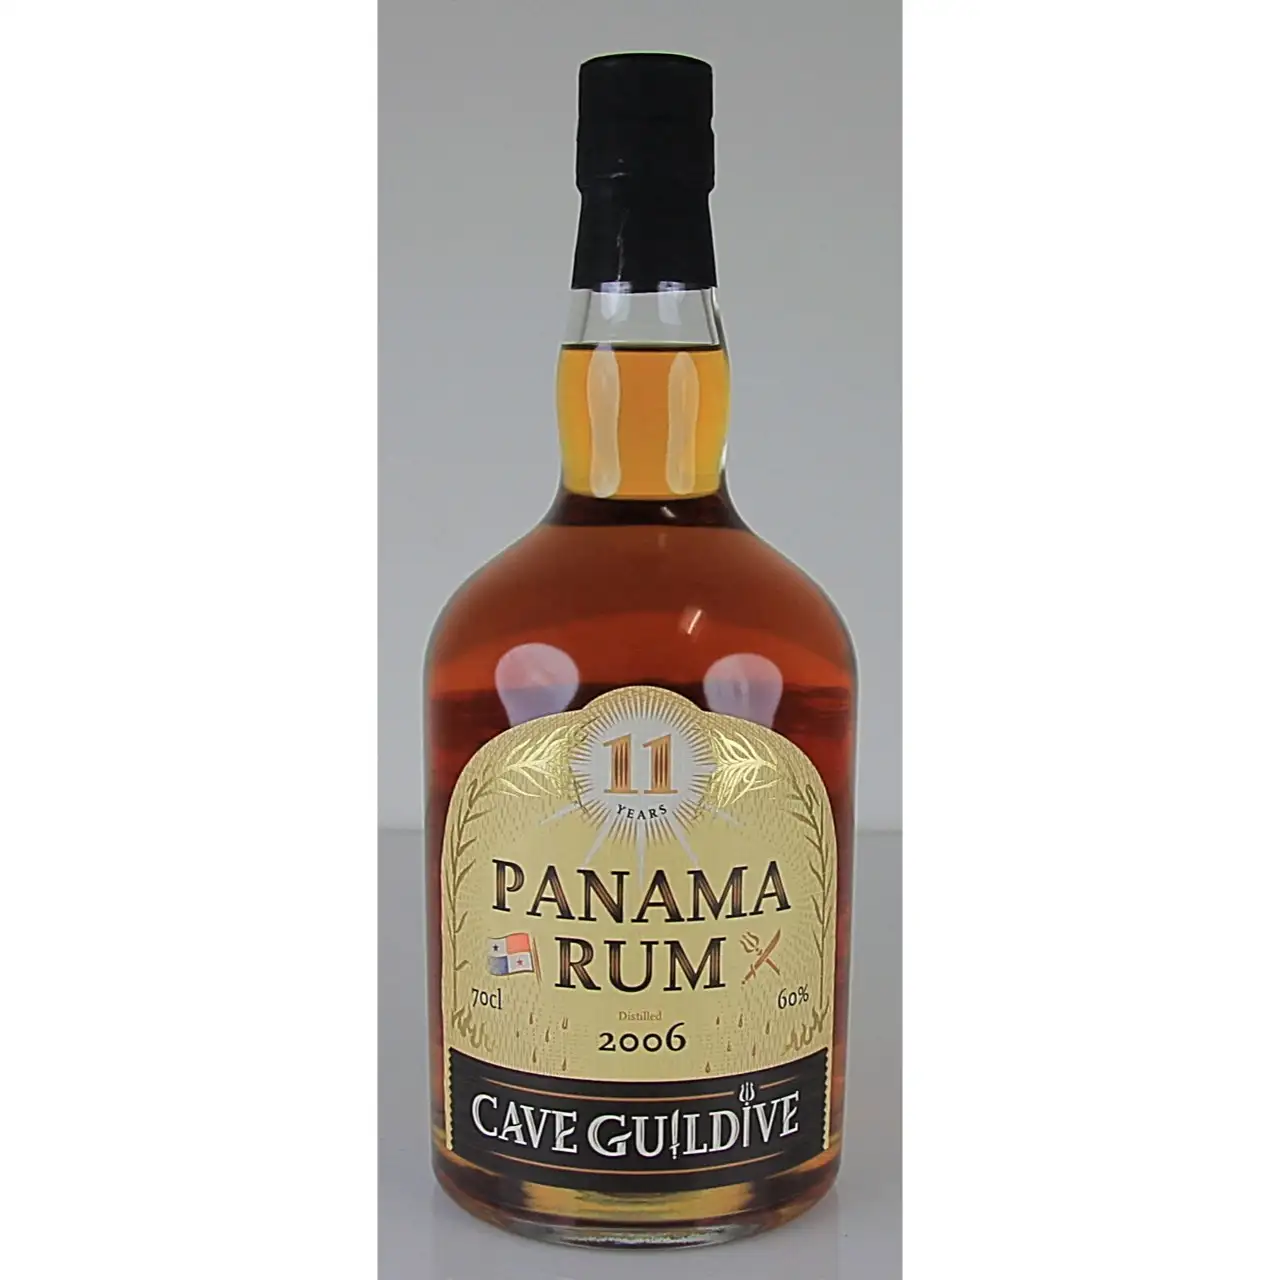 Image of the front of the bottle of the rum Panama Rum